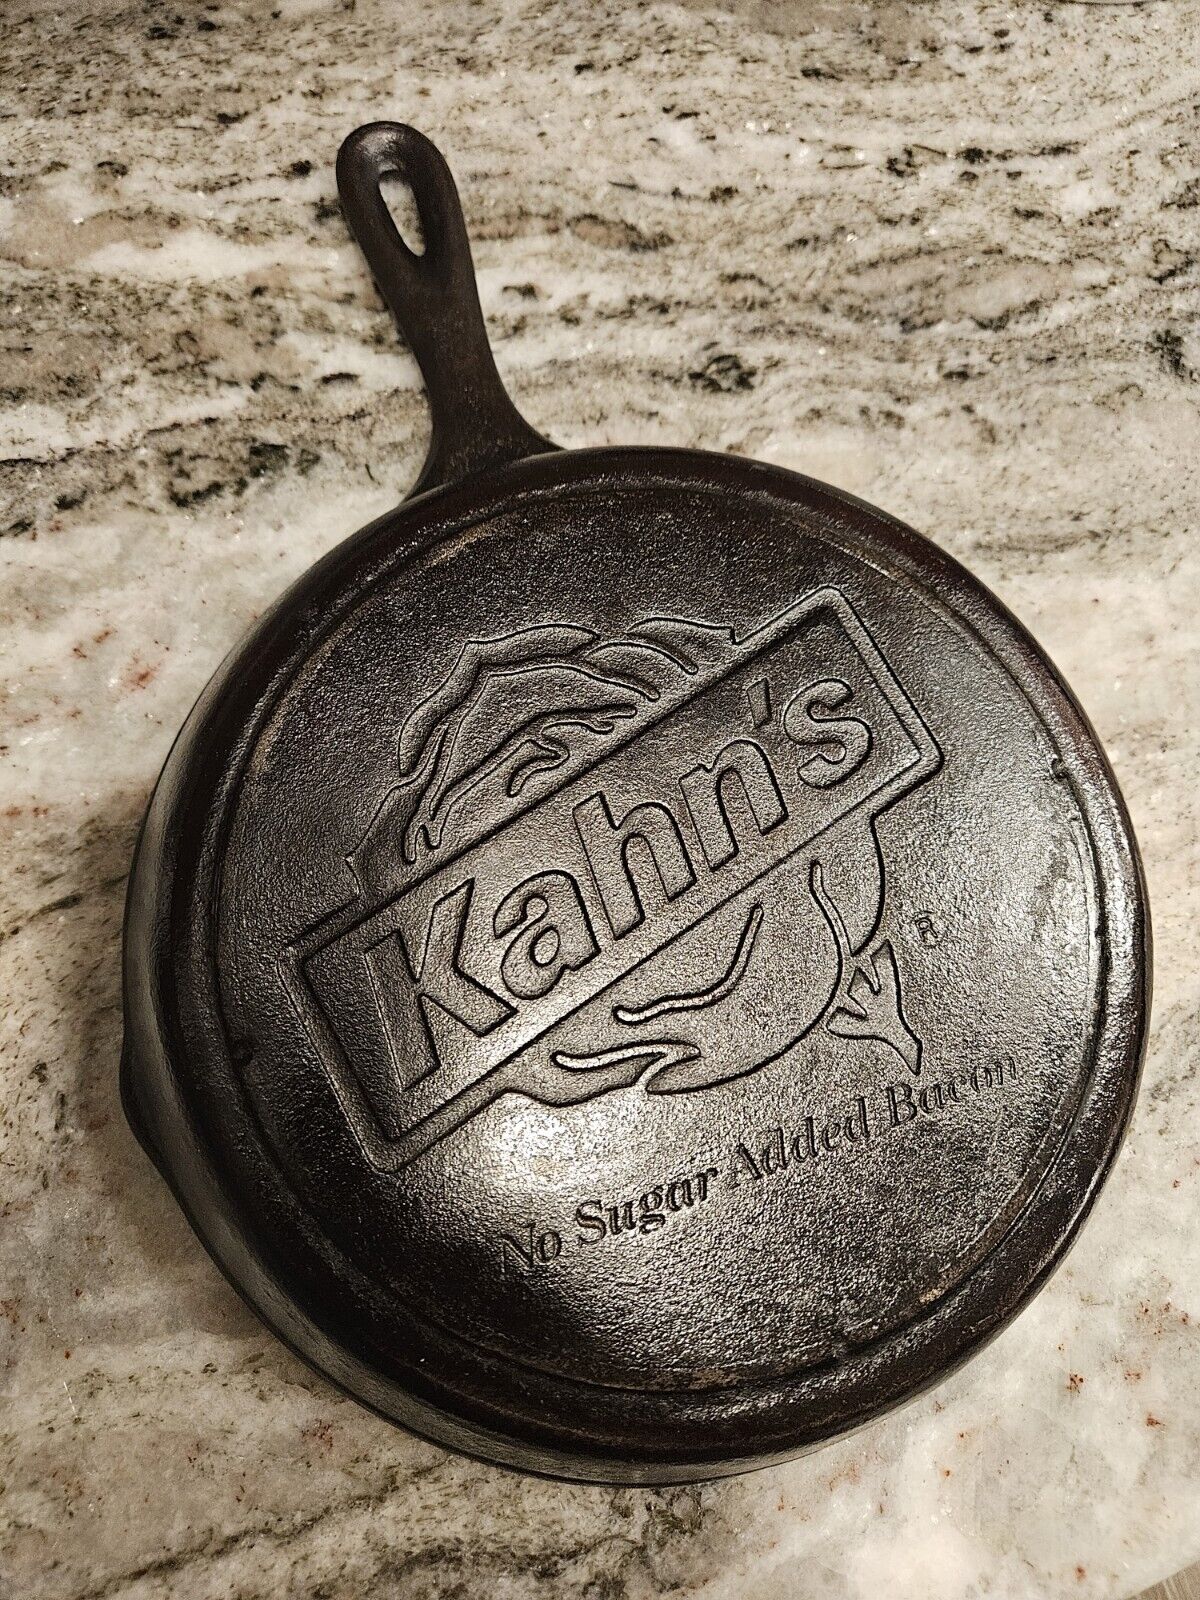 Kahn\'s Bacon Lodge Cast Iron Skillet 10 Inch - Rare Vintage Advertising Cookware